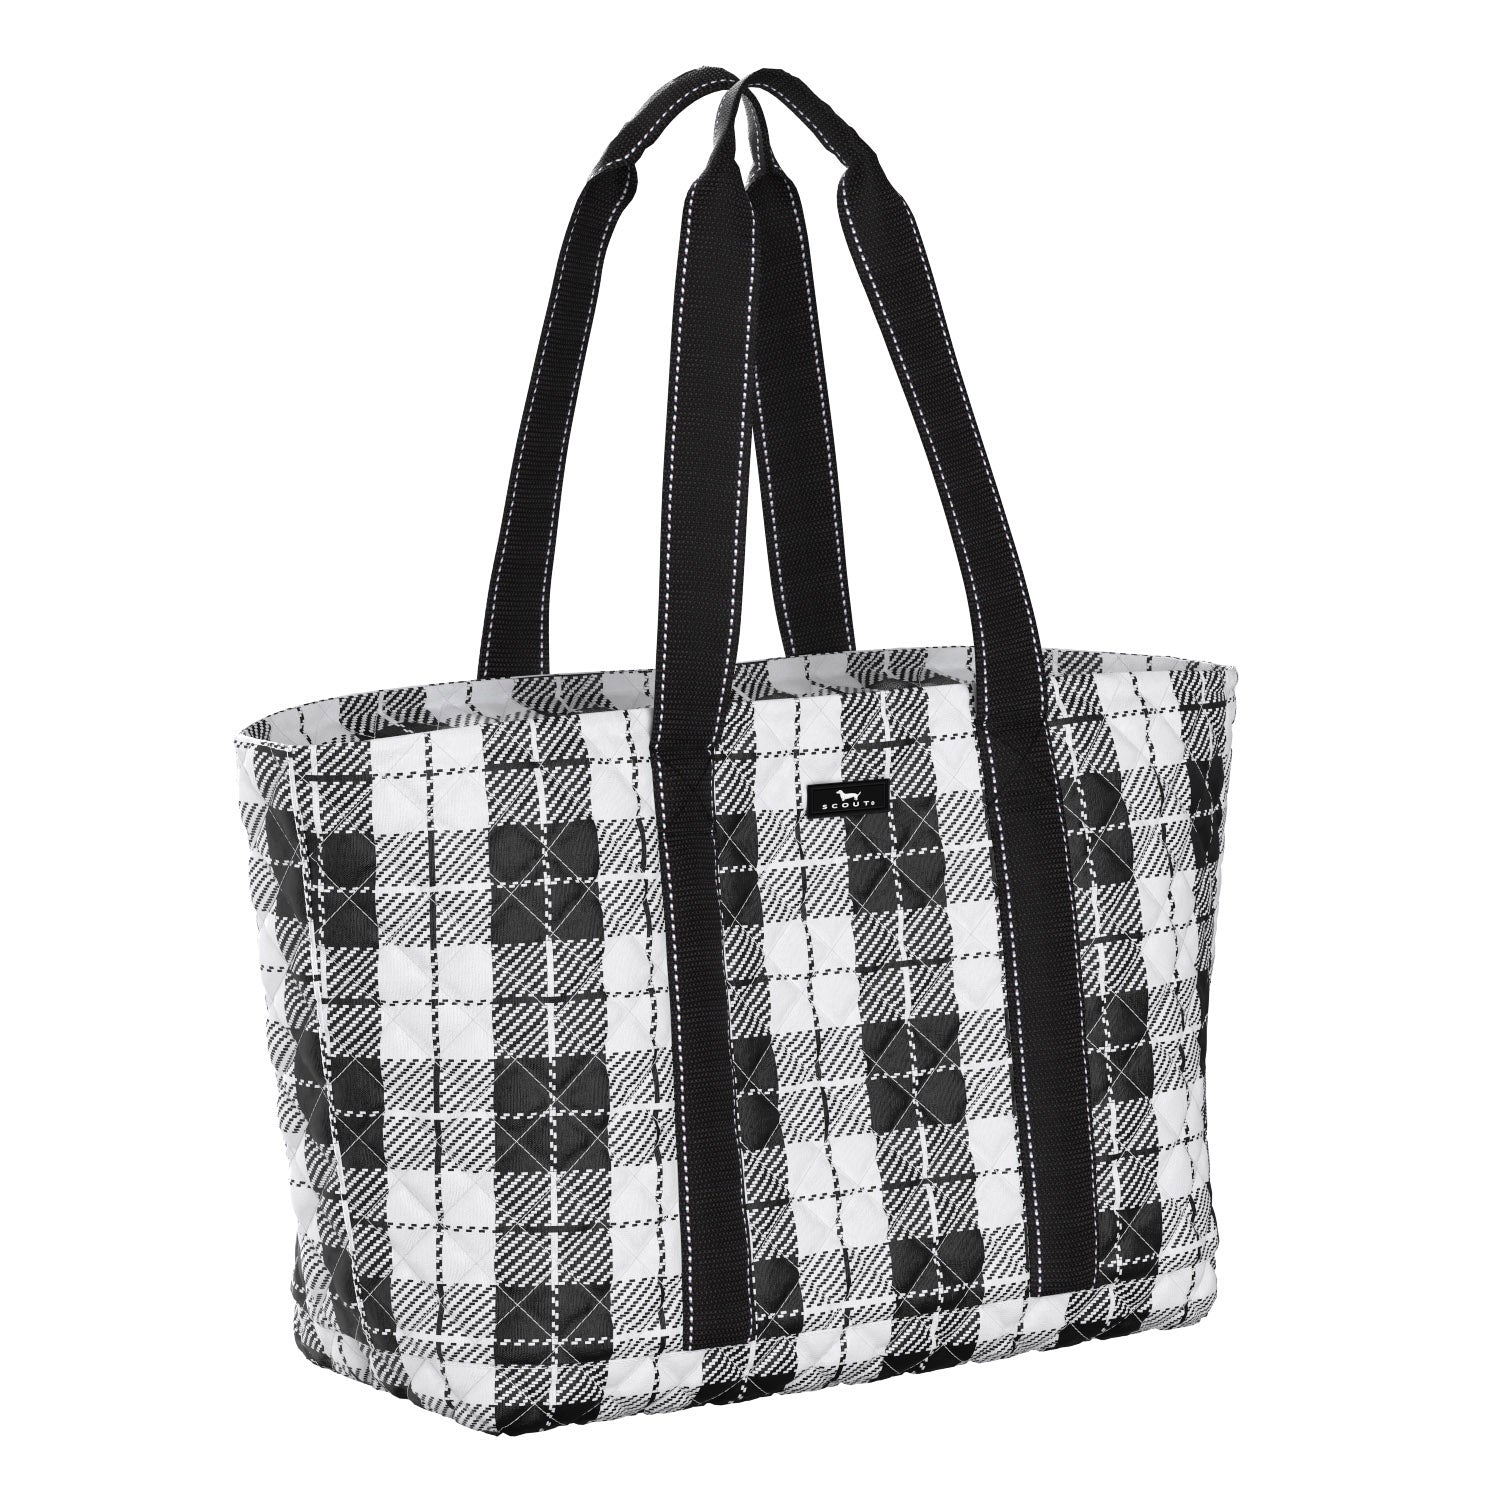 Black - Tote Organizer - Thirty-One Gifts - Affordable Purses, Totes & Bags